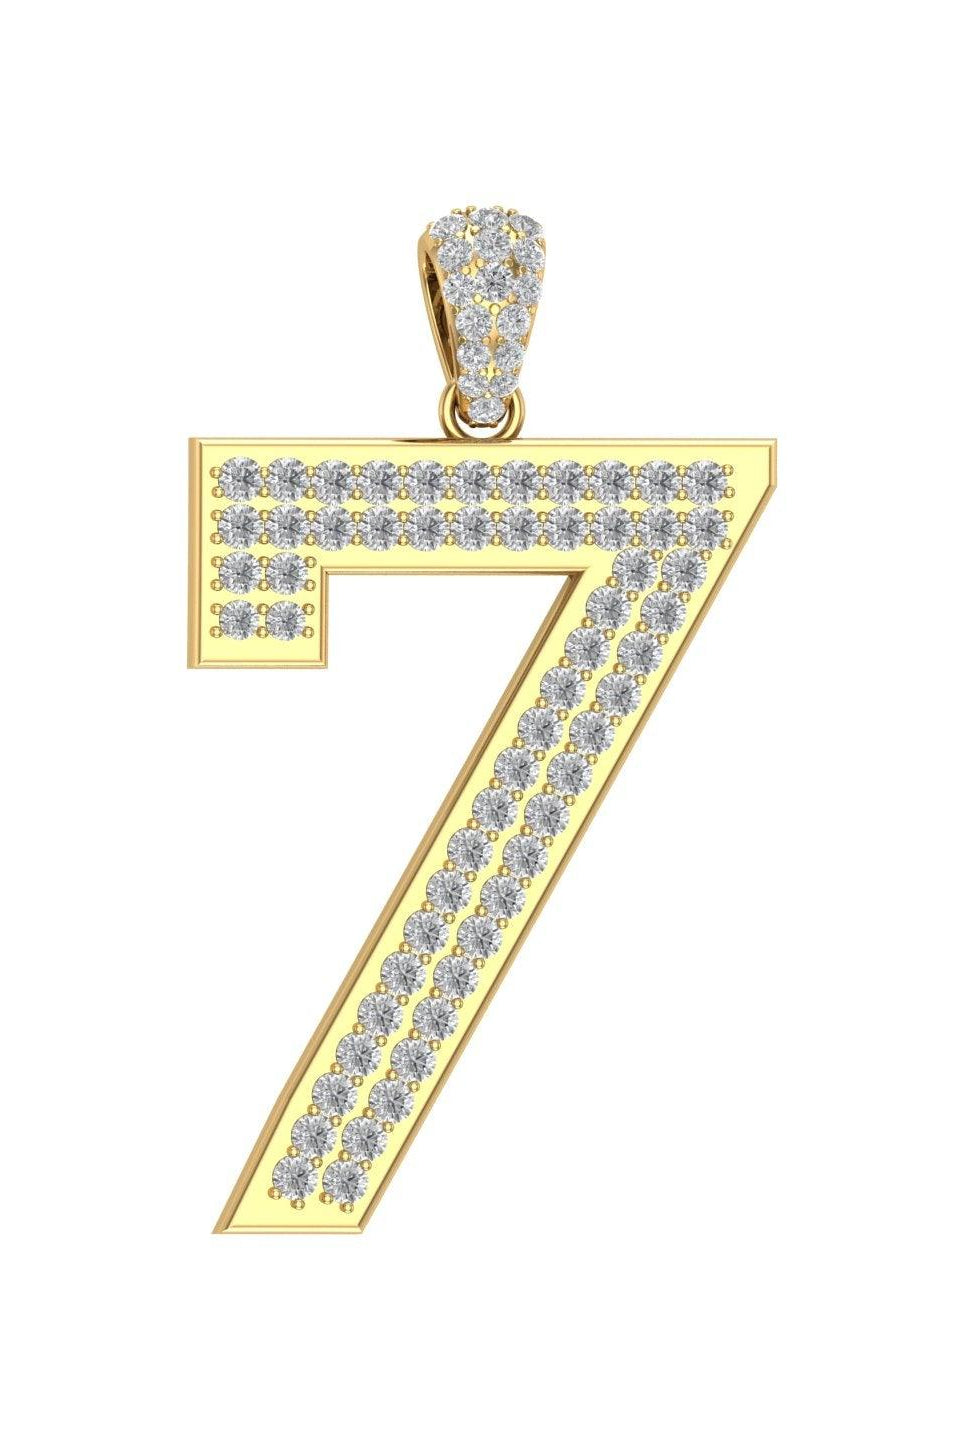 Gold Color Pendant in the Shape of 7 Made of 925 Sterling Silver Material with 20 Inch Long Silver Chain